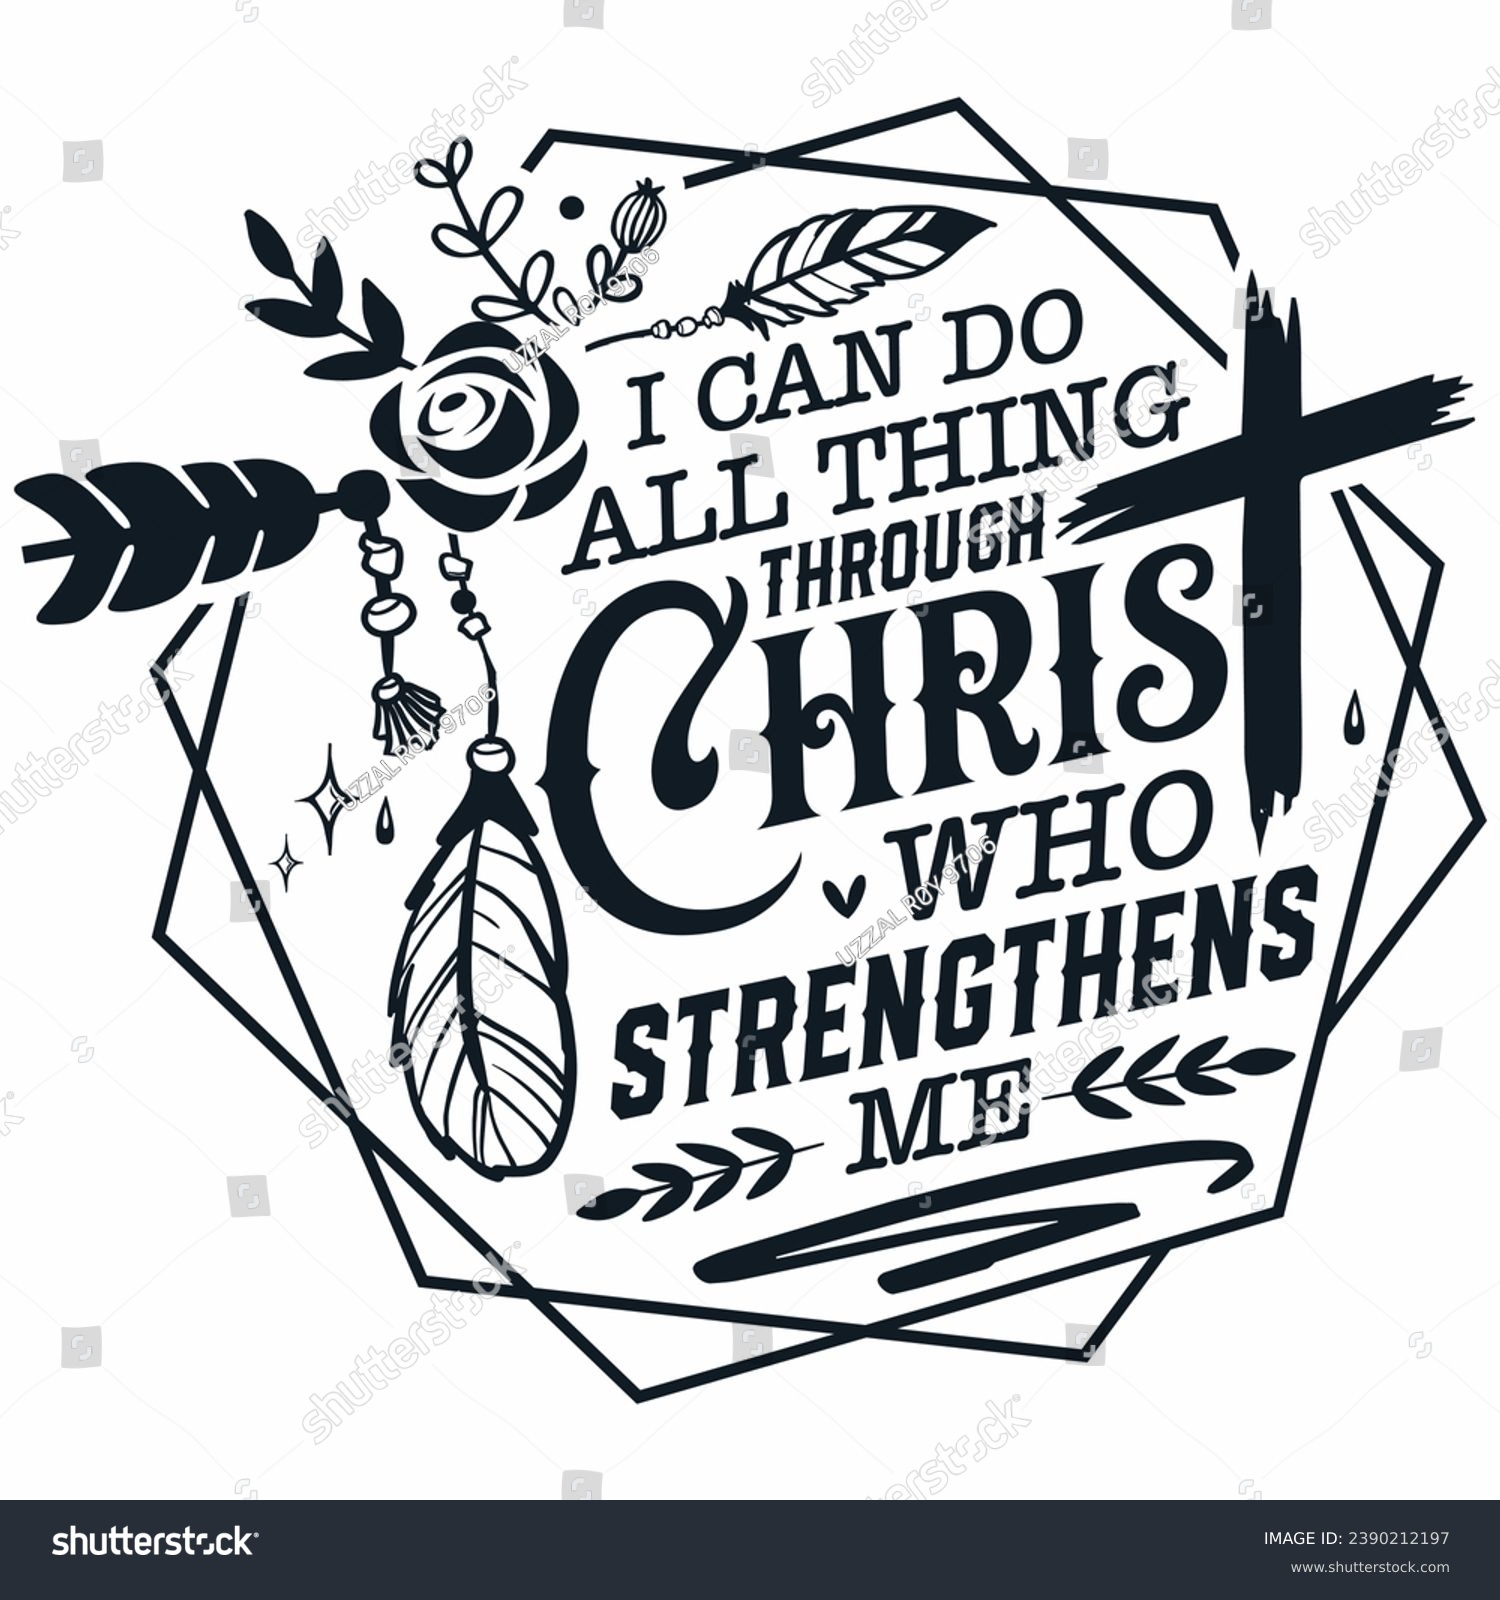 SVG of I can do all things through Christ who strengthens me Christian cross t-shirt design svg